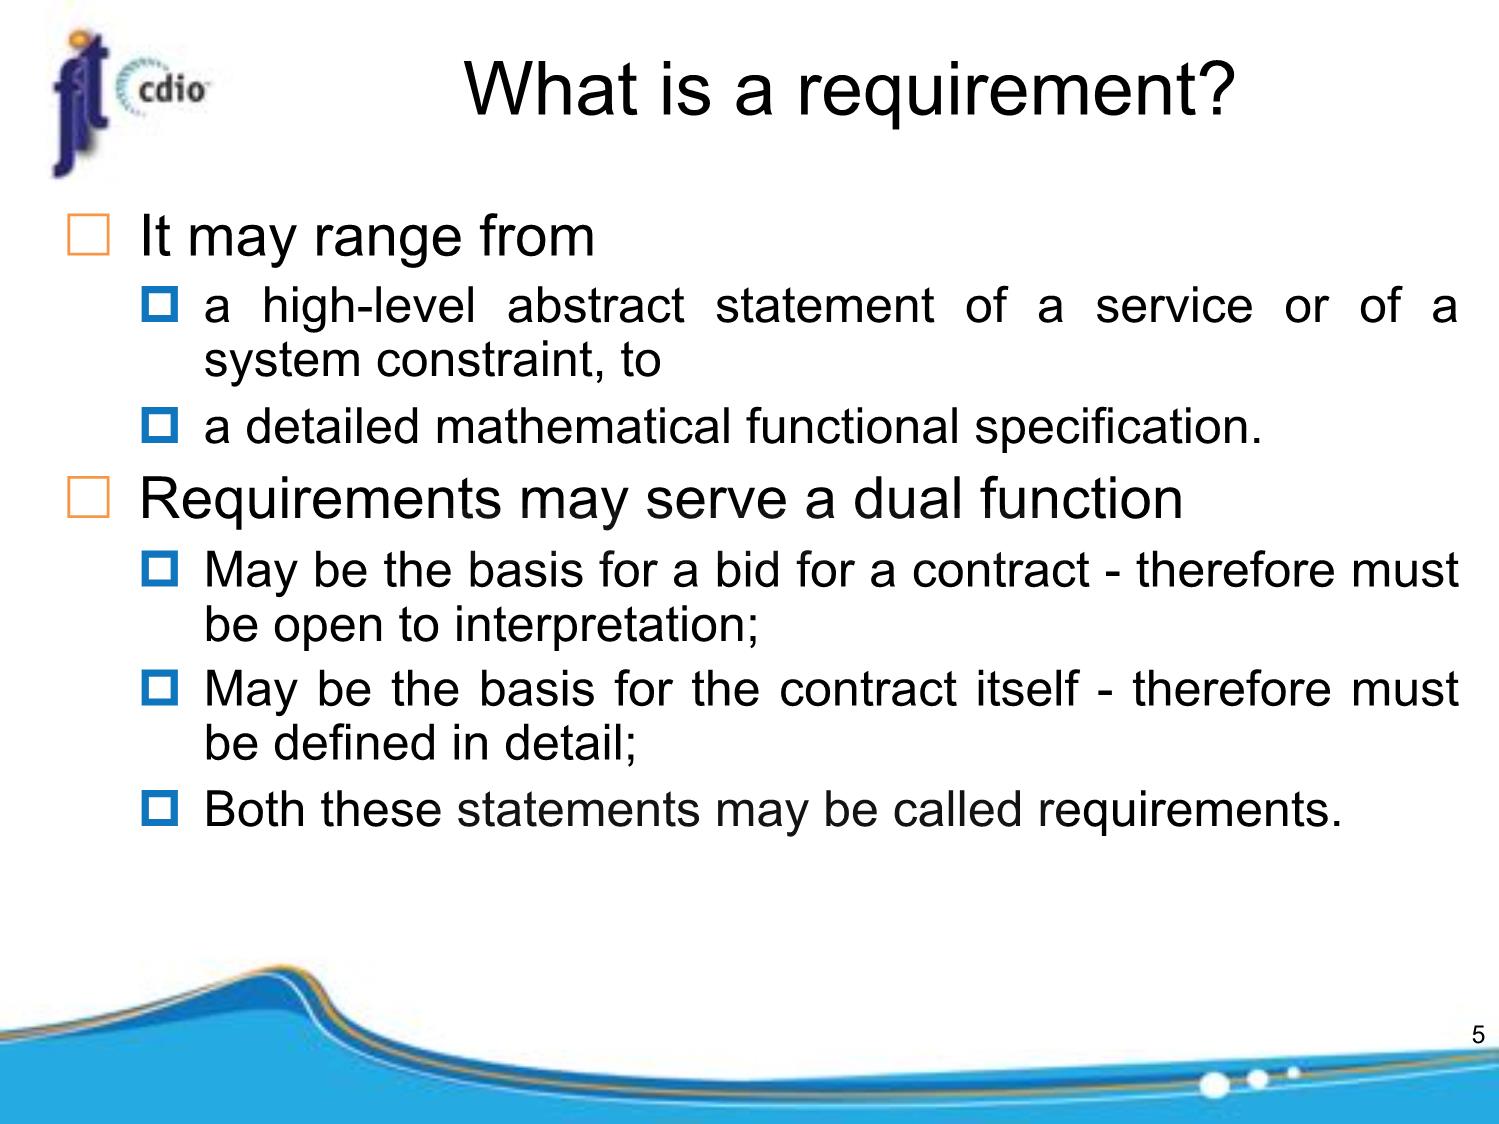 Bài giảng Introduction to Software Engineering - Week 4: Requirement Engineering - Nguyễn Thị Minh Tuyền trang 5